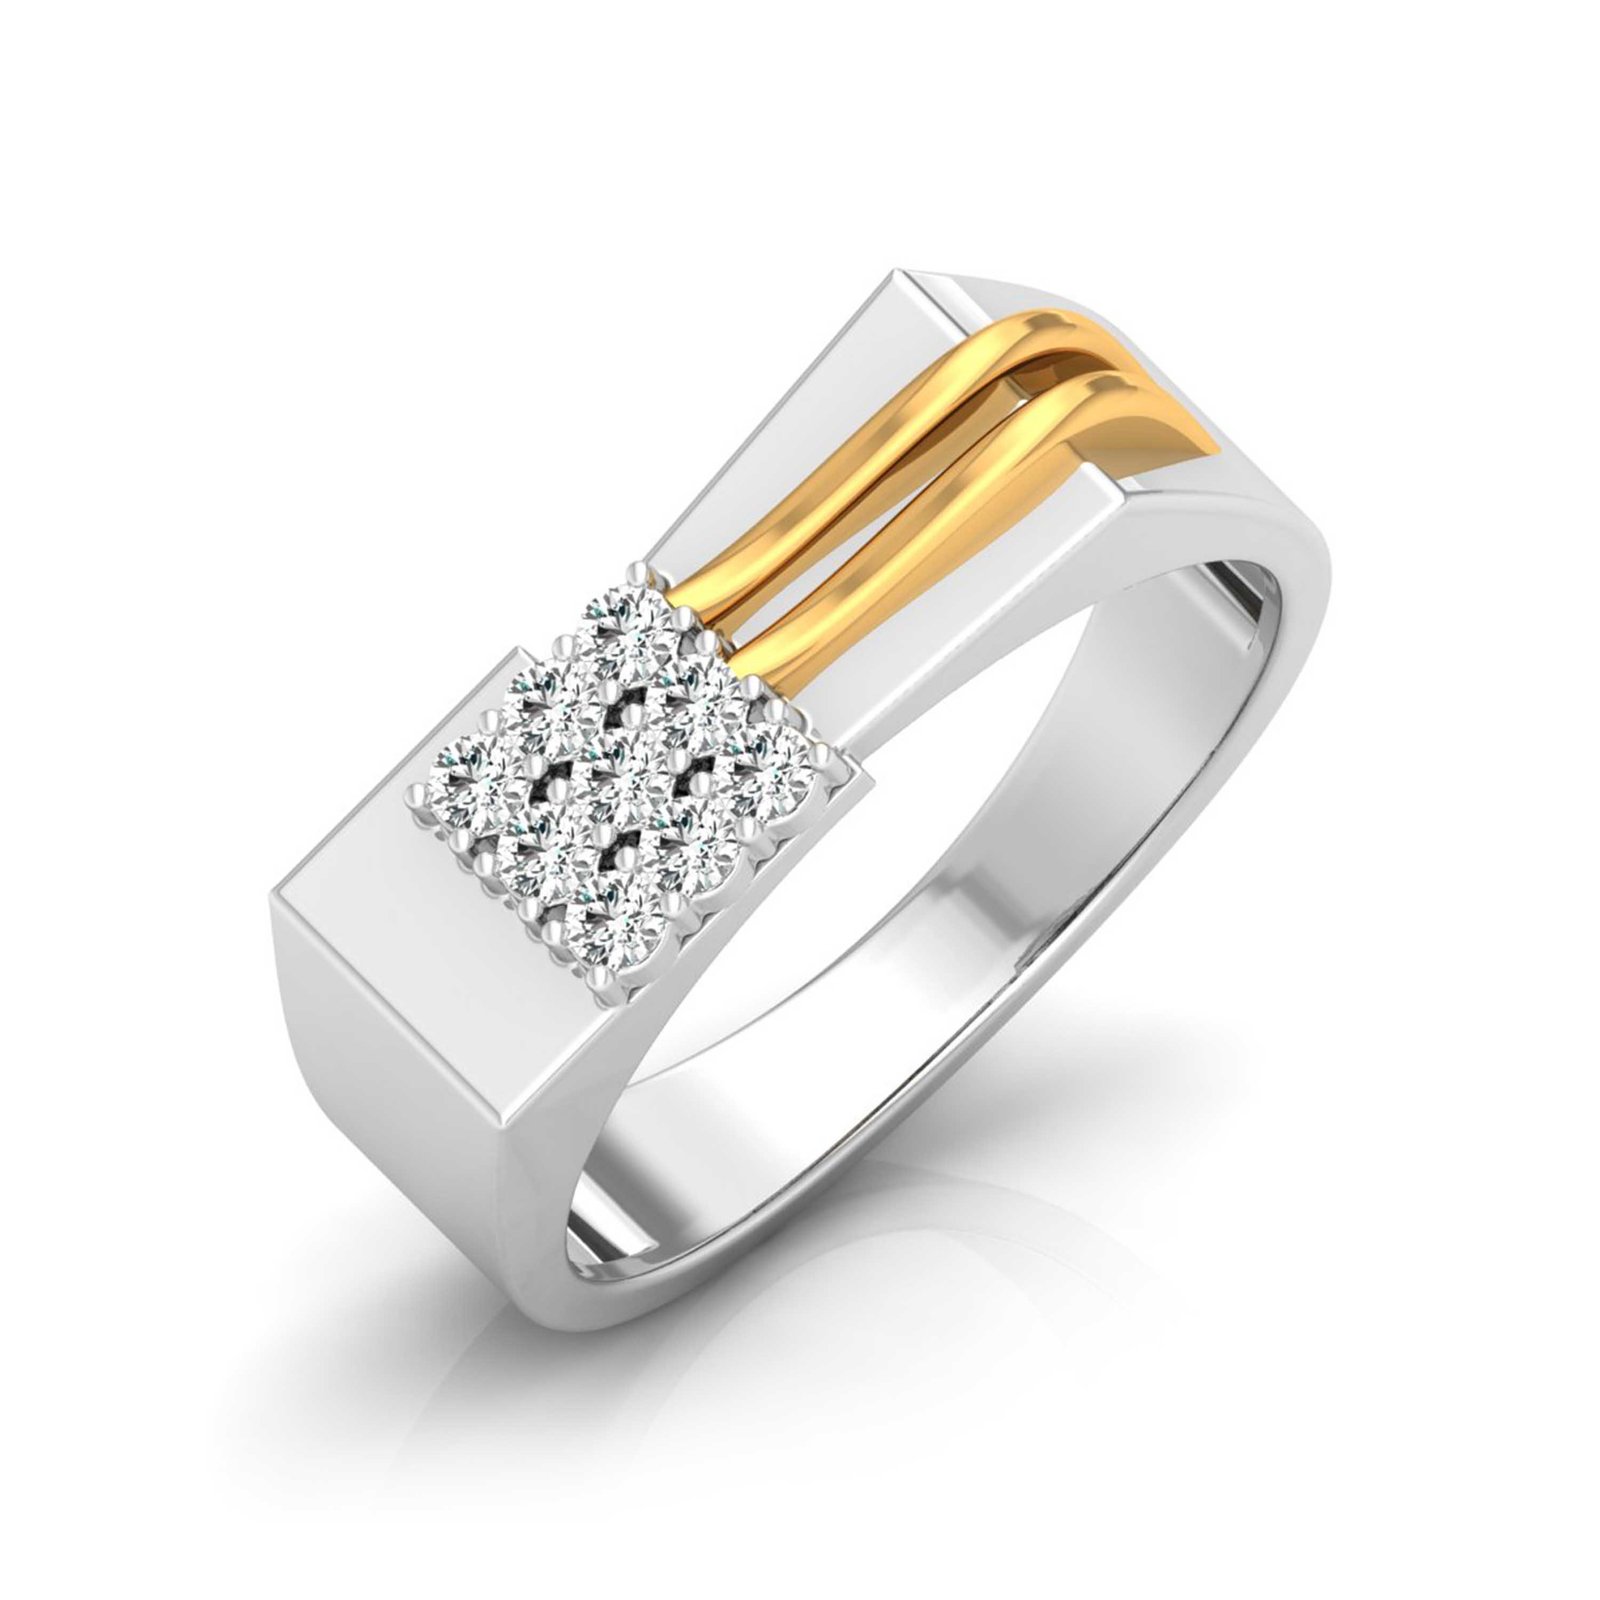 Smart Man's Diamond Ring In Pure Gold By Dhanji Jewels